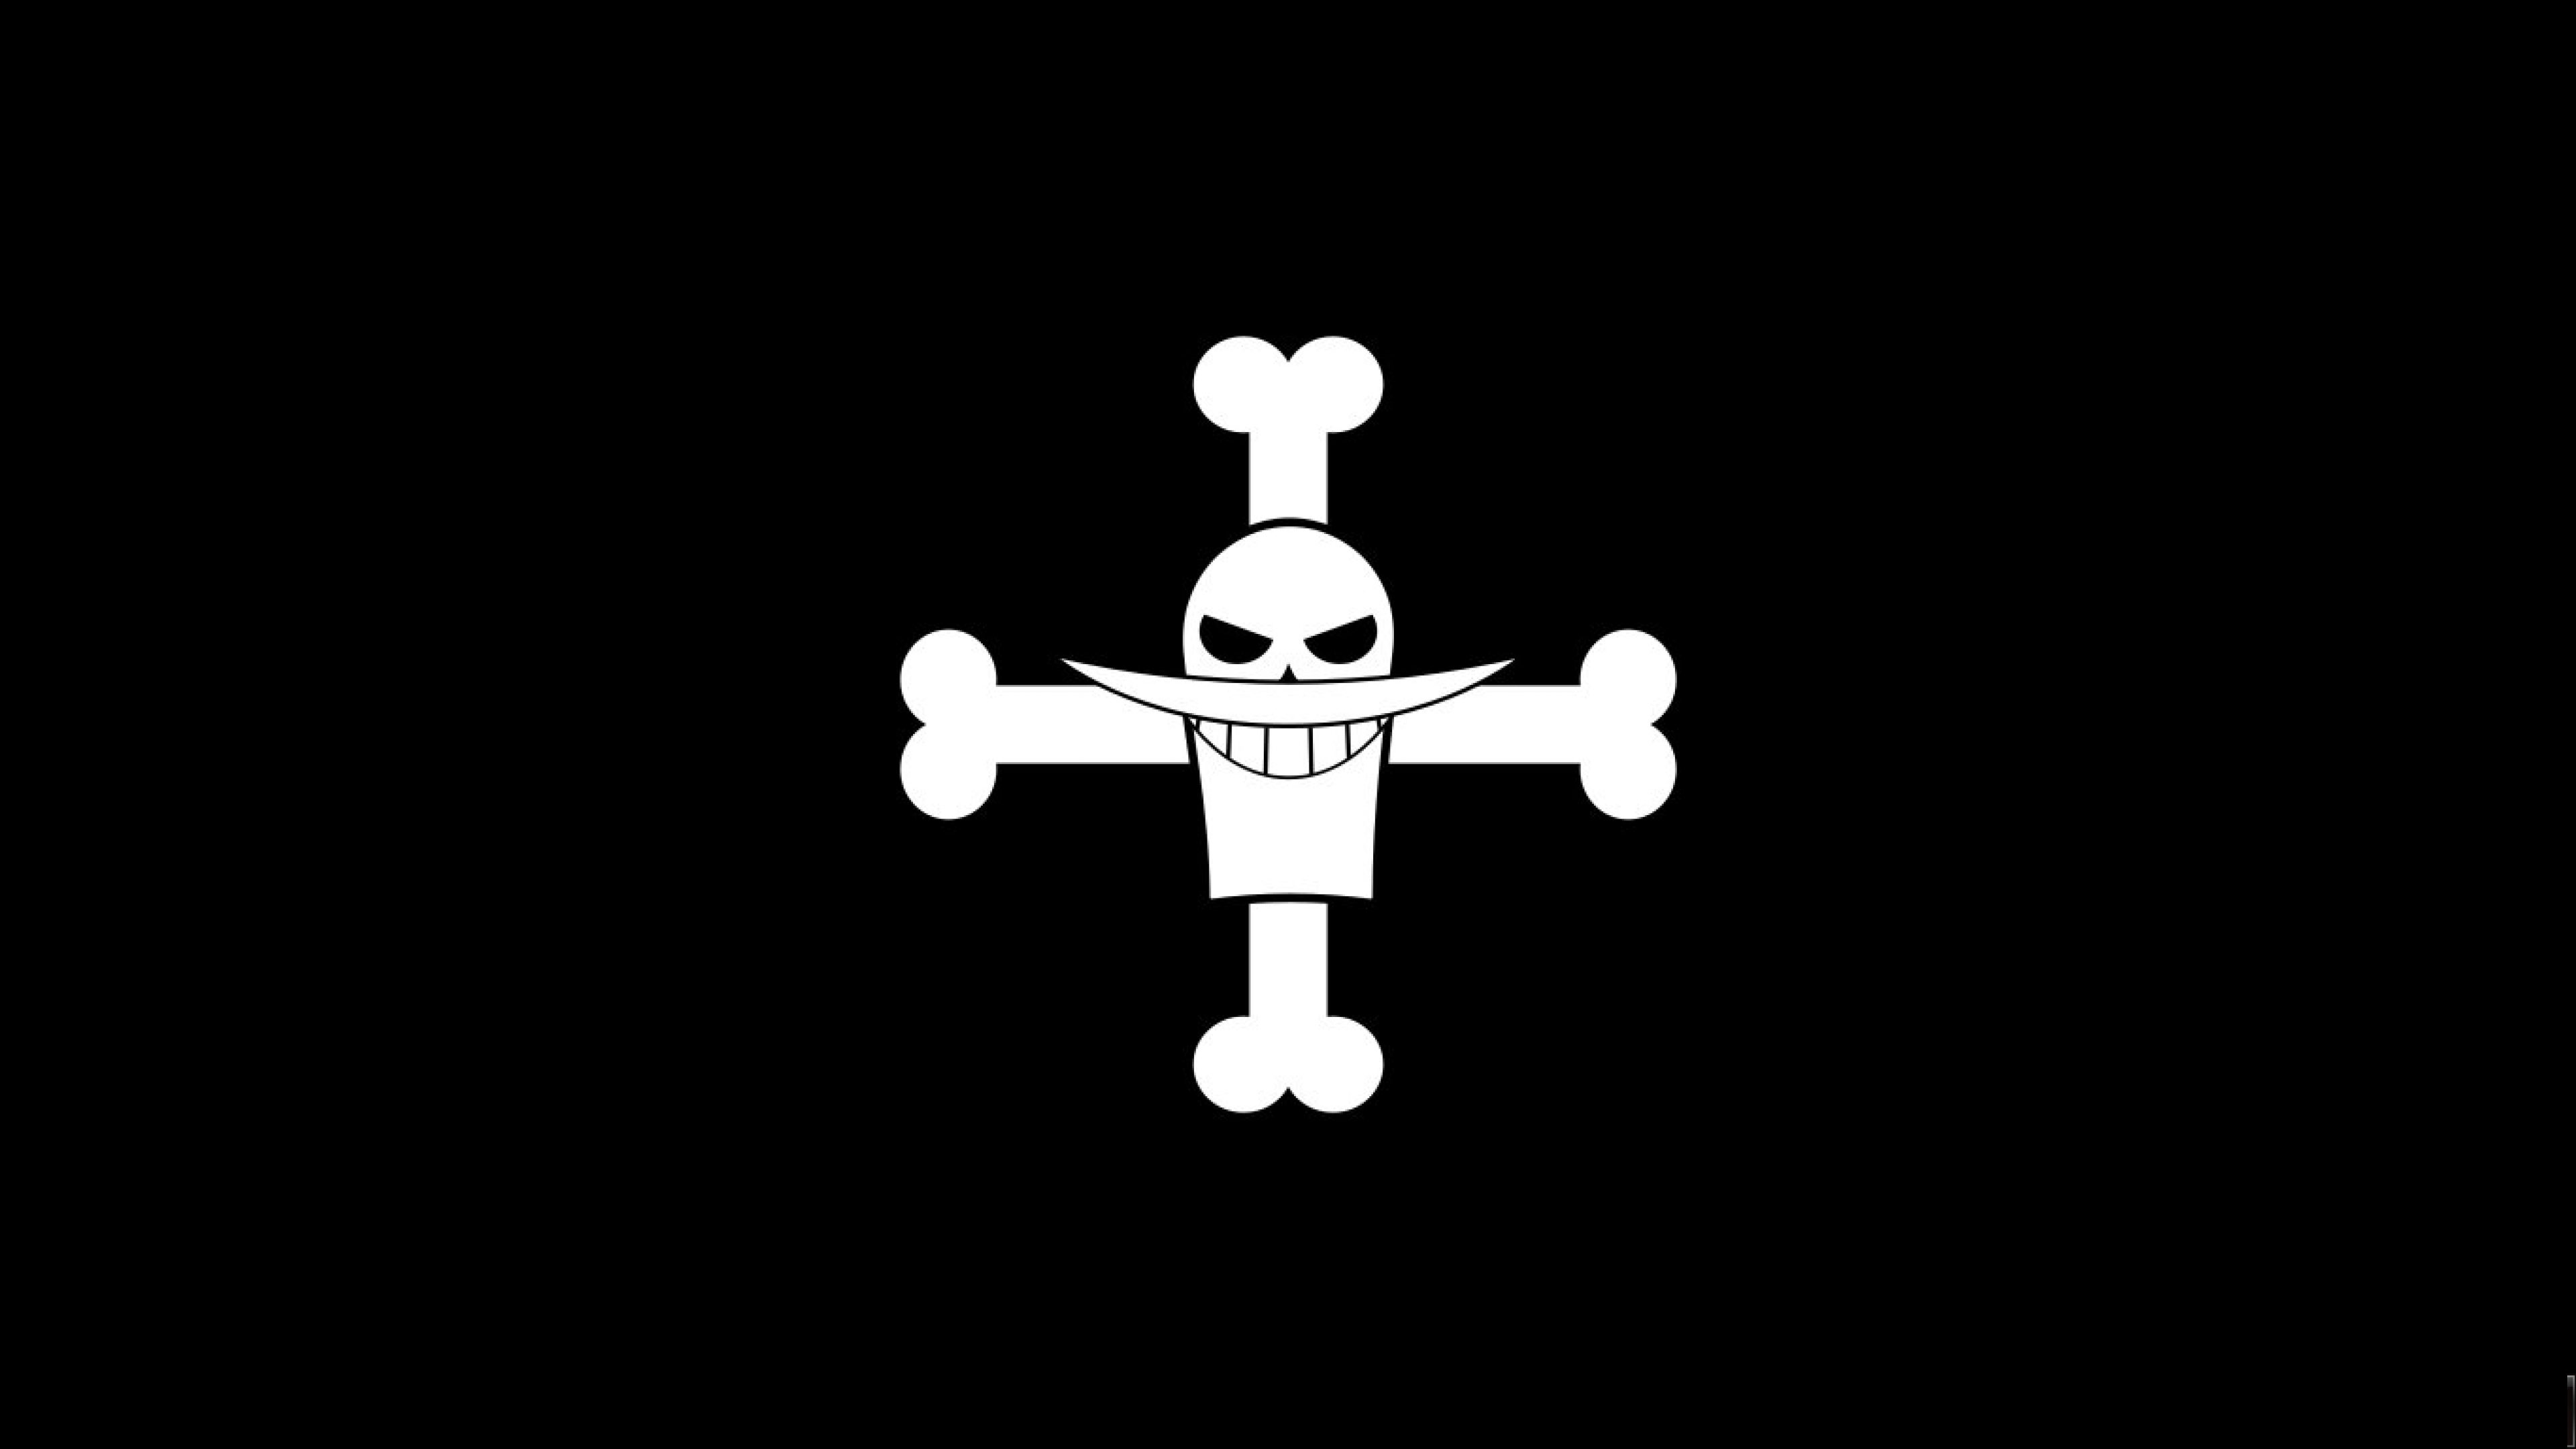 Simple Marco Black background Jolly roger One piece Flag Dark